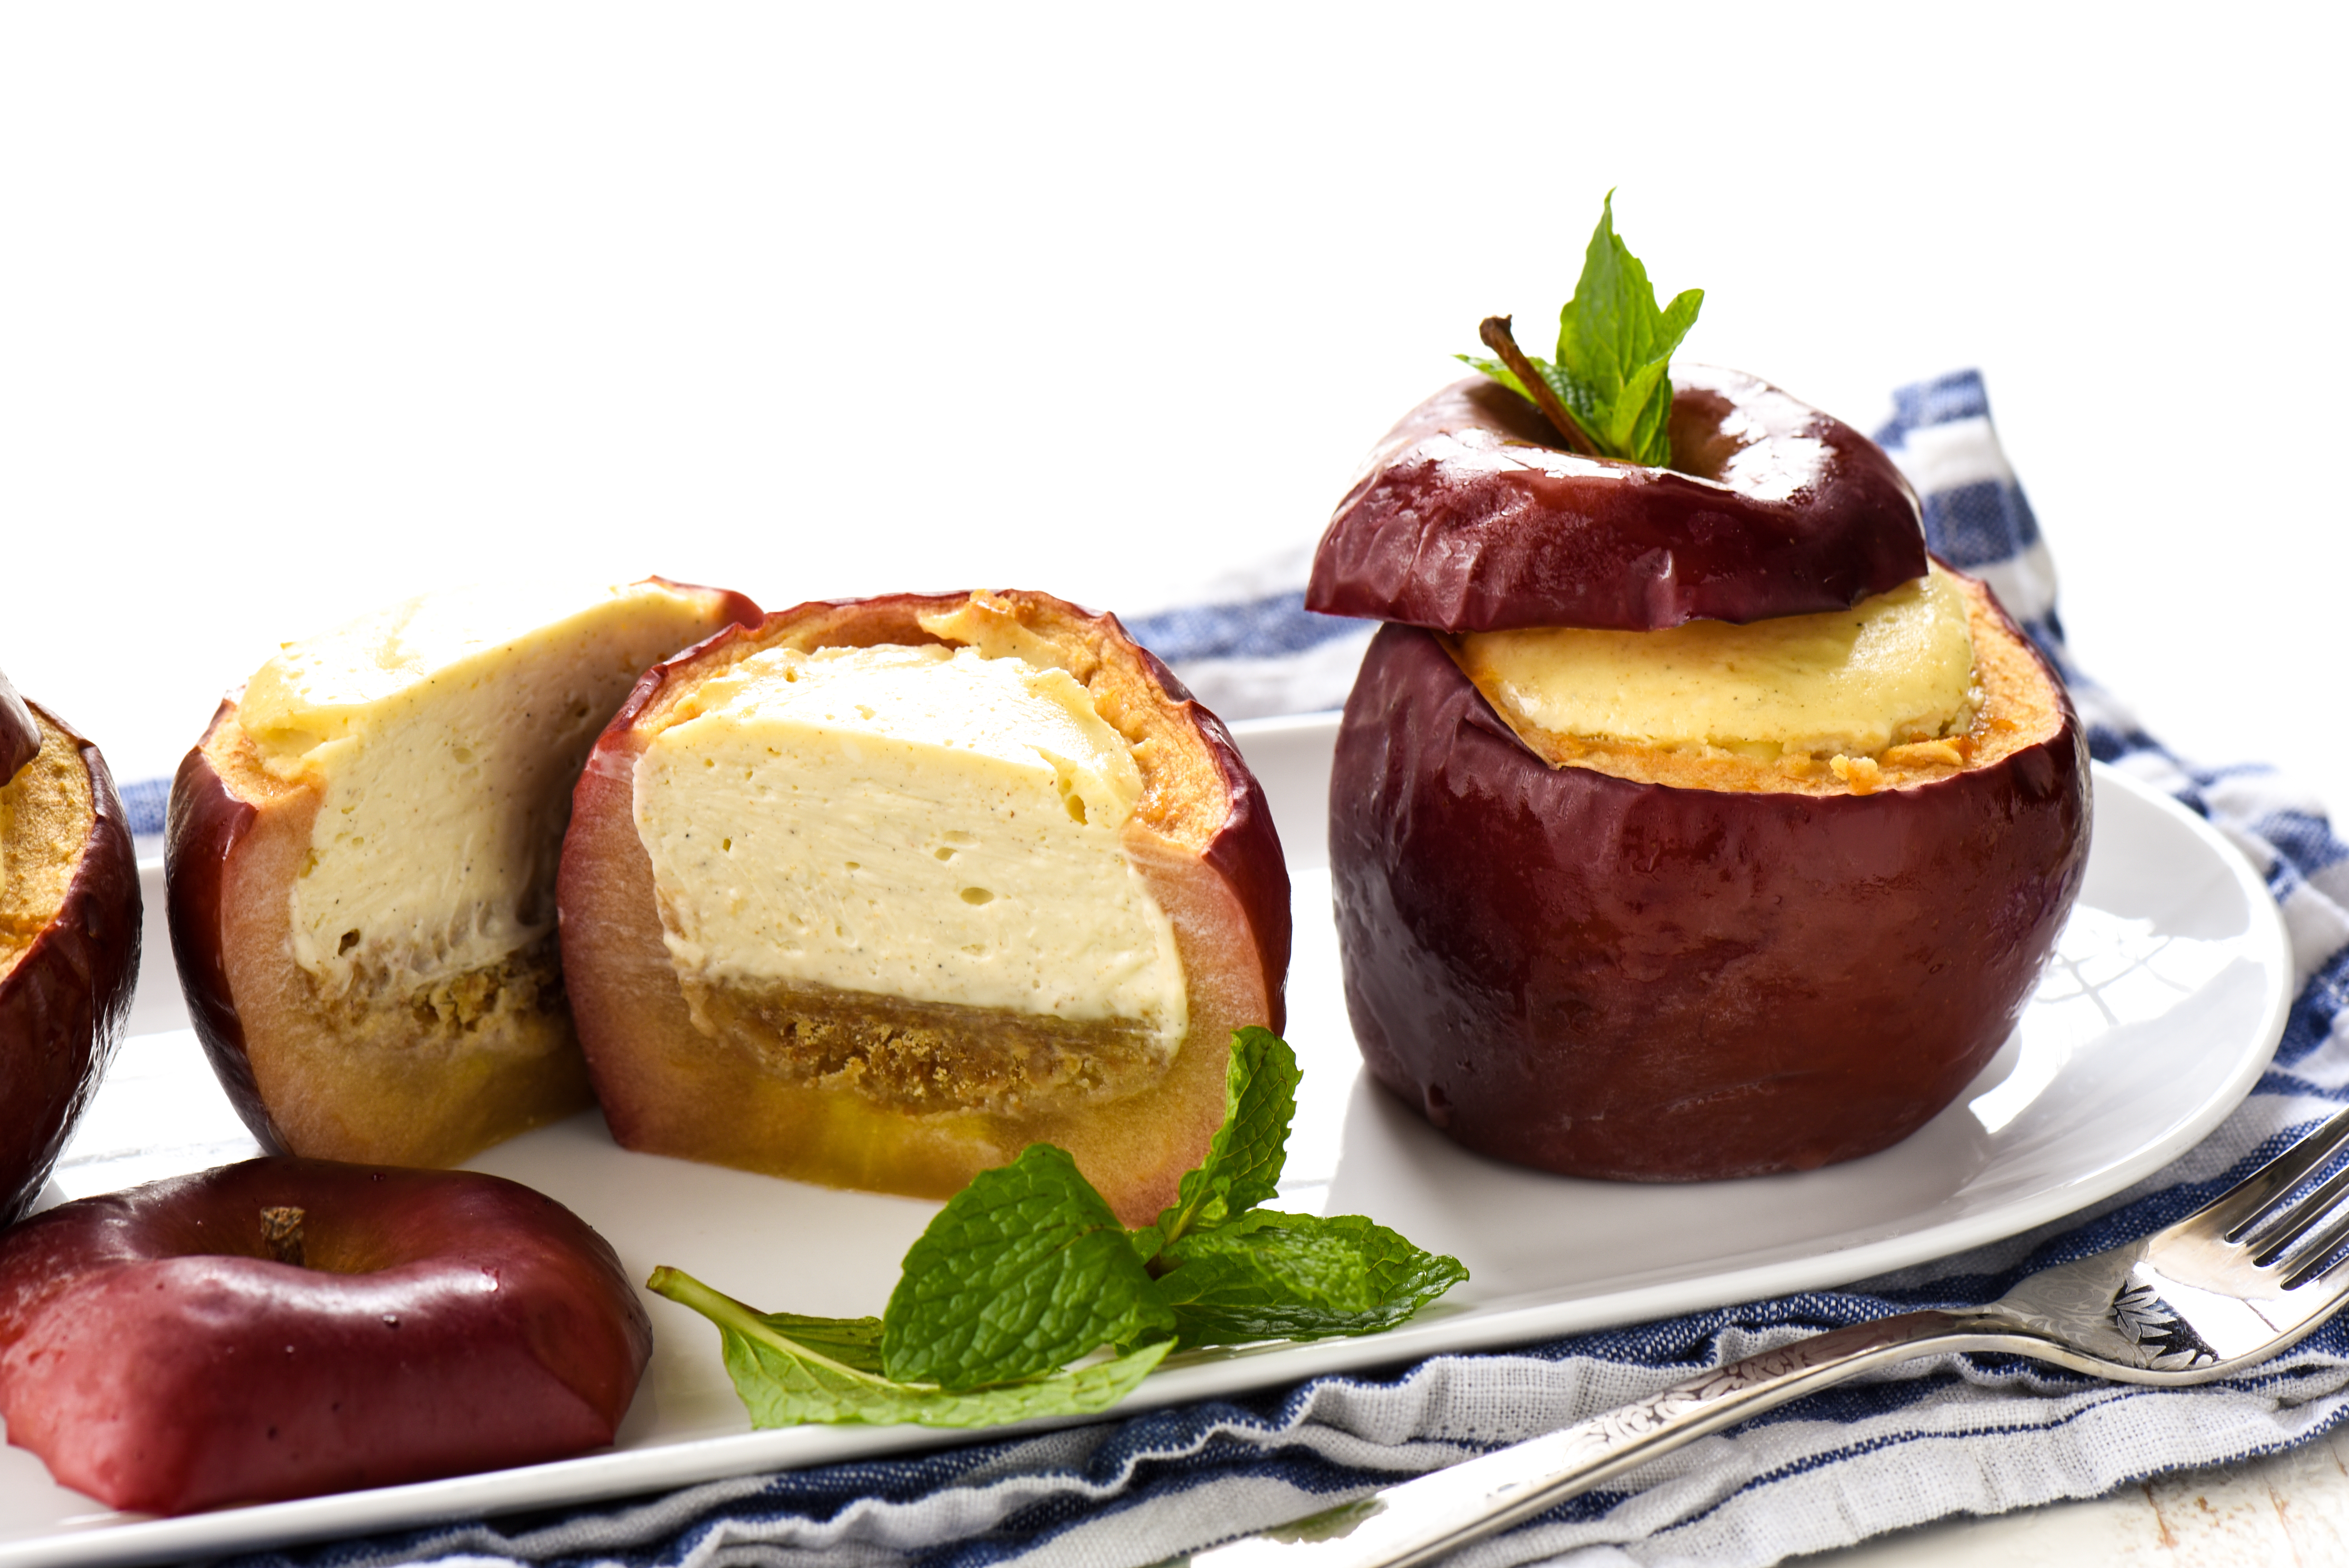 Baked Apples Stuffed with Cheesecake